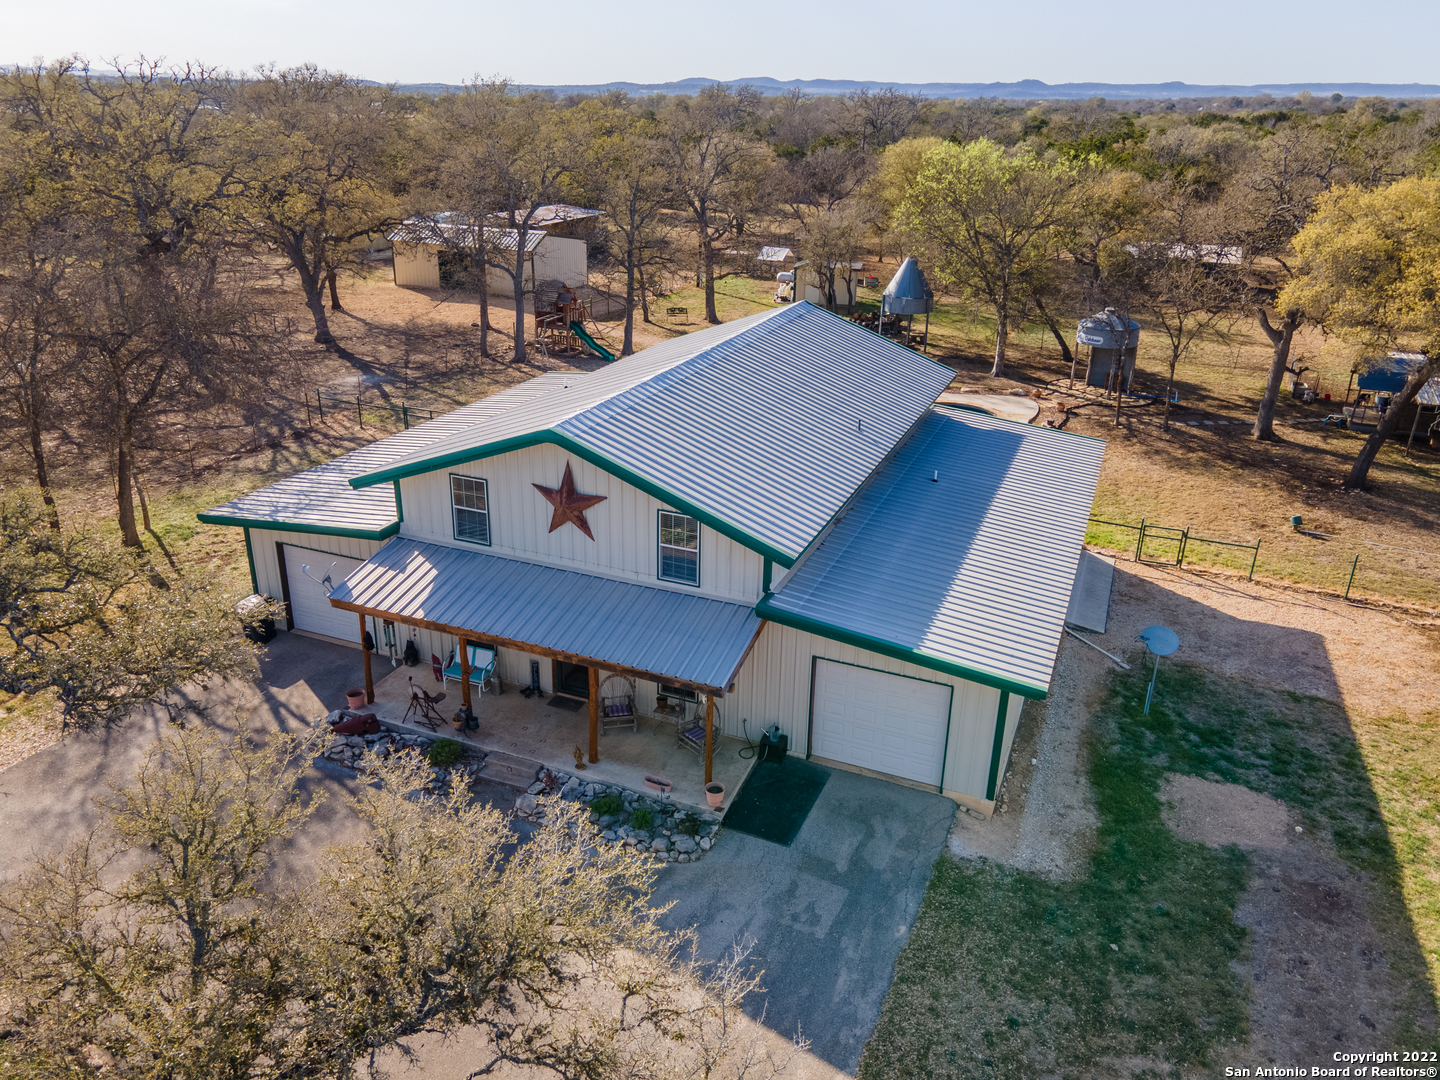 Texas Hill Country Gem! THE LAND is easily accessible and less than a half mile from State Highway 173 between Kerrville (15 minute commute) and Bandera (3 minute commute). An electric, gated entrance will grant you access into the Wildlife Tax Exempt, 21 acre property that boasts mature hardwoods, level land, and good soils. THE IMPROVEMENTS include a 3bdrm 2 bath 2461 sq ft home, w/ an in ground pool, a workshop most men only dream of having, horse barn w/ 3 stalls, tack room, water and electricity, additional loafing shed with 3 stalls and a hay shed. THE HOME is an all metal construction with 6" spray foam insulation to beat the heat! Fiber Optic Internet connection, stained concrete flooring on the main level, custom cypress cabinetry in the kitchen, with granite countertops and island in the kitchen. Upstairs is a loft with a 3rd bedroom and additional living room area. There is an additional interior electric gate that opens to a circle drive when you drive up to the house. One acre of land is fenced around the home for pets. The in ground pool/spa was installed in 2021 - it is remote operated, heated and 7 feet deep. THE SHOP has 3 bays with a vehicle lift in the center. Over 70 yards of concrete used in the construction of the slab with 2'X2' footers/beams around the perimeter and below the lift. There is also an office and bathroom in the corner of the shop. Additional vehicle storage includes; 2 attached single car garages, a motorcycle storage with a roll up door, and an ATV/mower storage off the side of the home. This property WILL NOT LAST LONG... Call and schedule your showing ASAP!